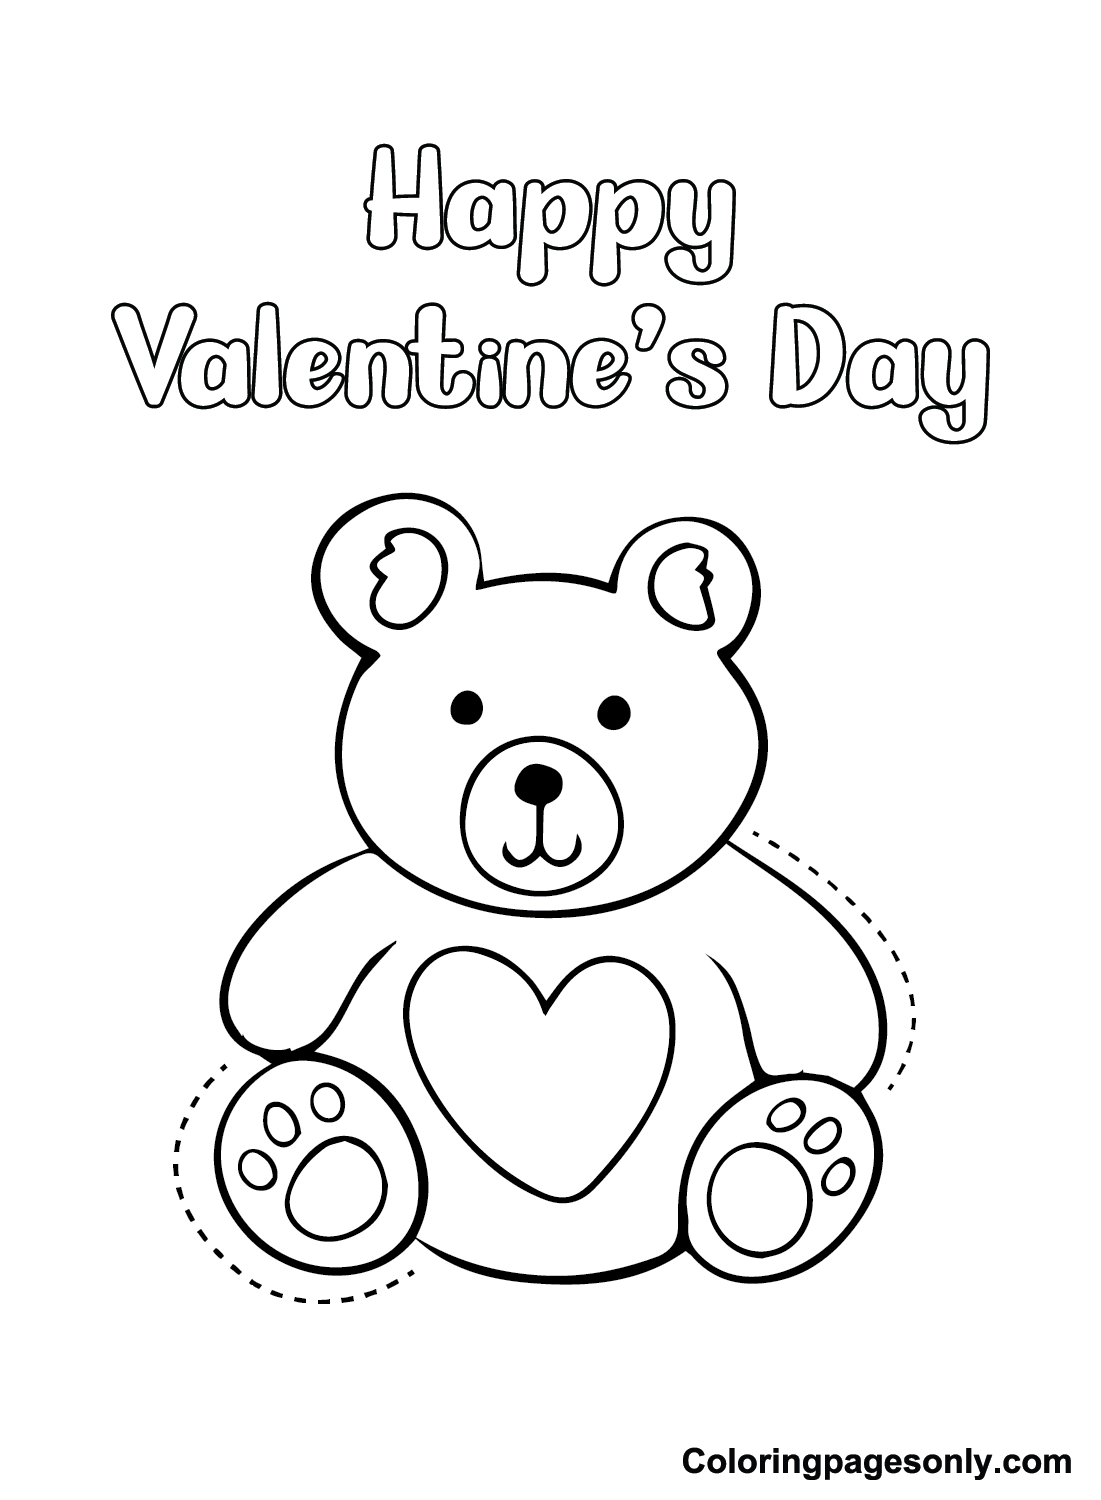 Valentines Day Cards Friends Coloring Page - Free Printable Coloring Pages